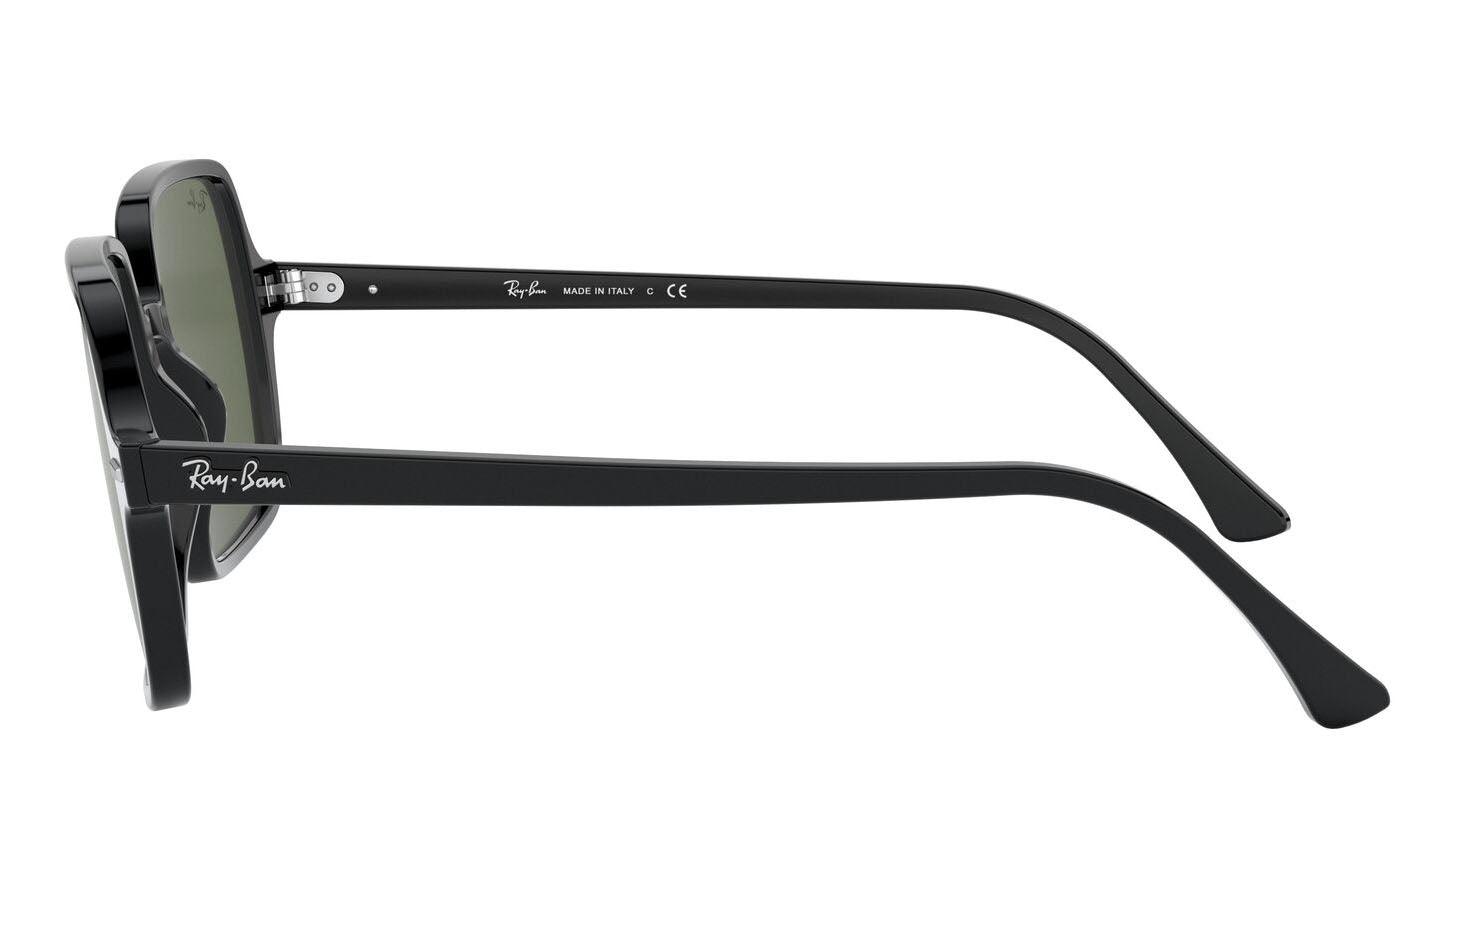 RAY-BAN SQUARE II 901 31 - Opticas Lookout